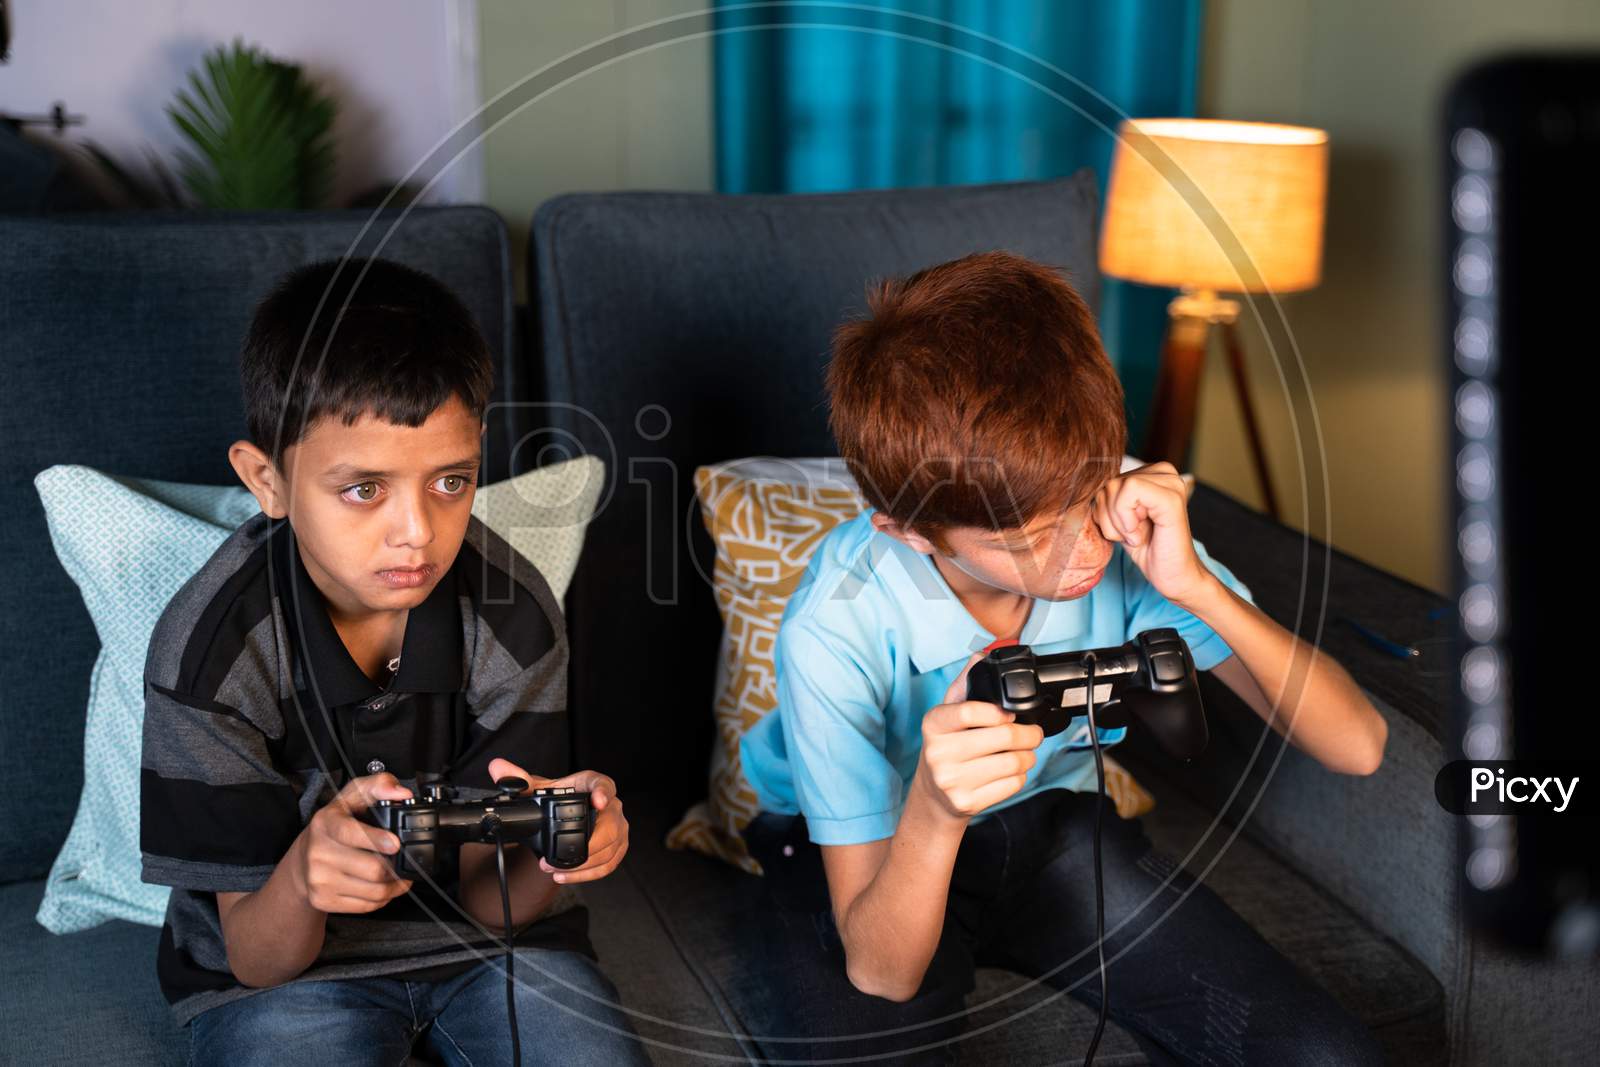 Concept Of Eye Strain Due To Over Night Video Game Play - Two Kids Playing Video Game During Late Night At Home And One Kid Rubbing His Eyes Due Eye Irritations.